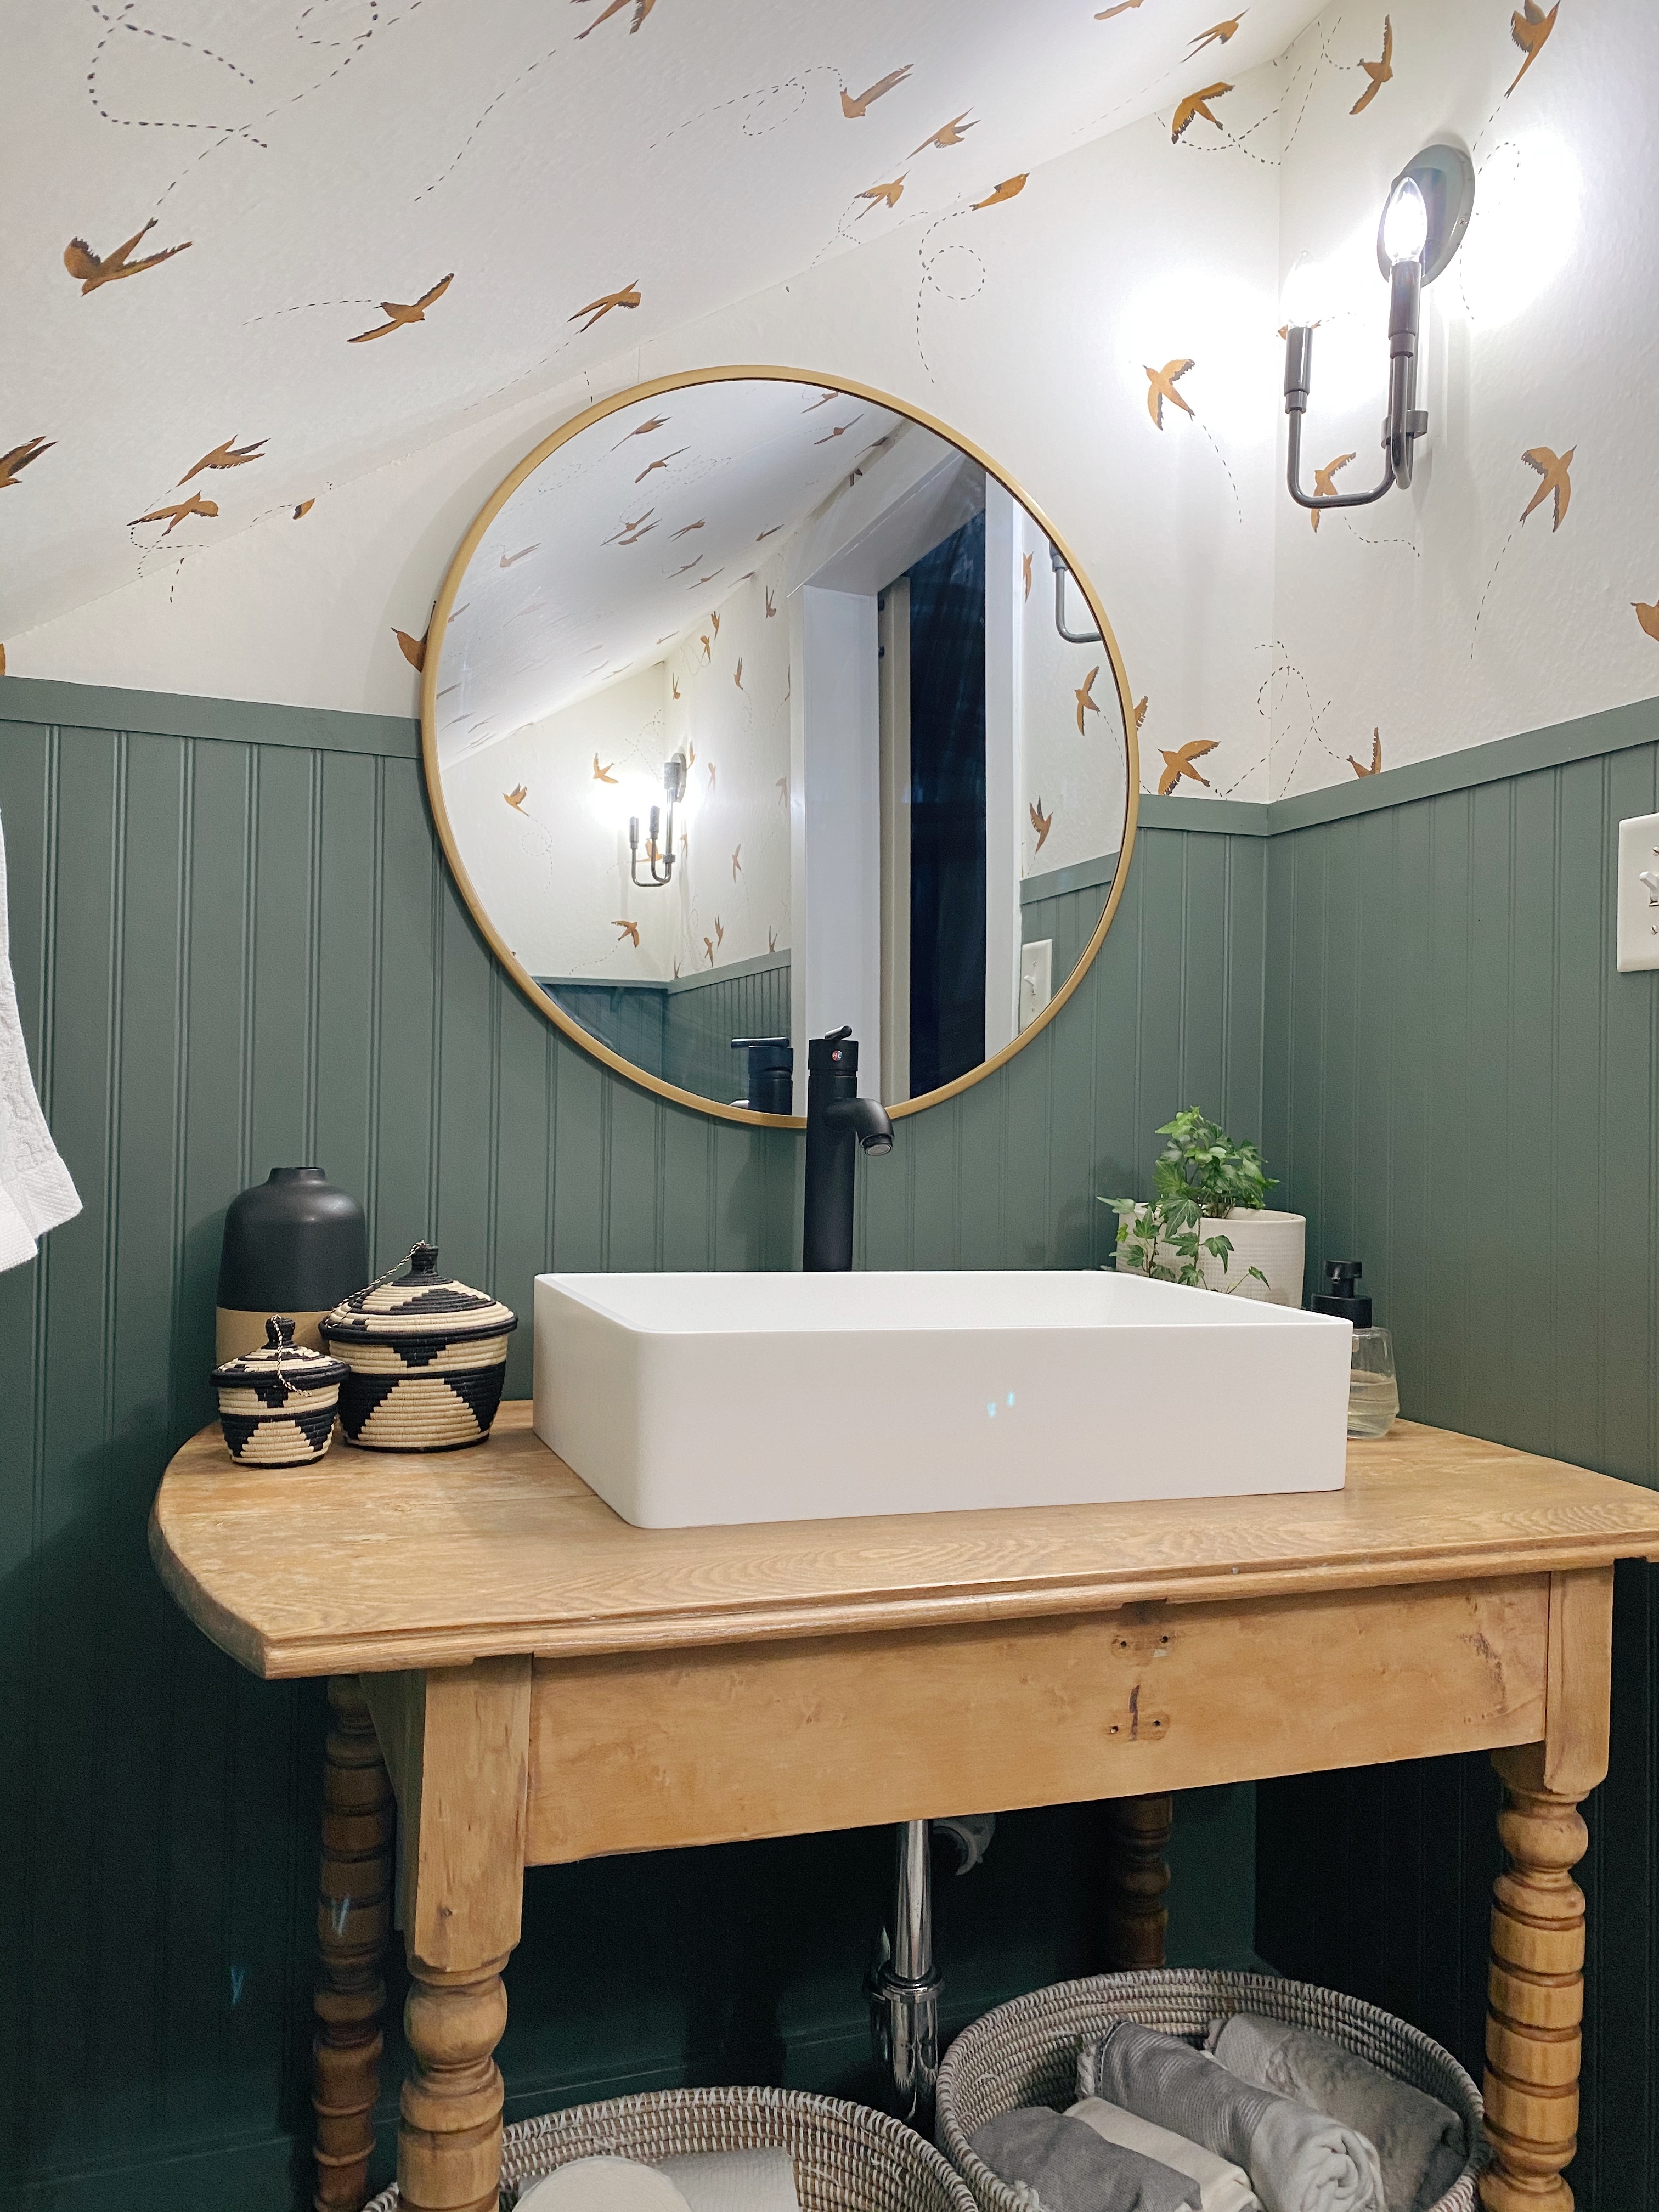 Five things to think about when you are considering creating a vessel sink stand in a bathroom. Check out how we took an old table and transformed it into a bathroom vanity!